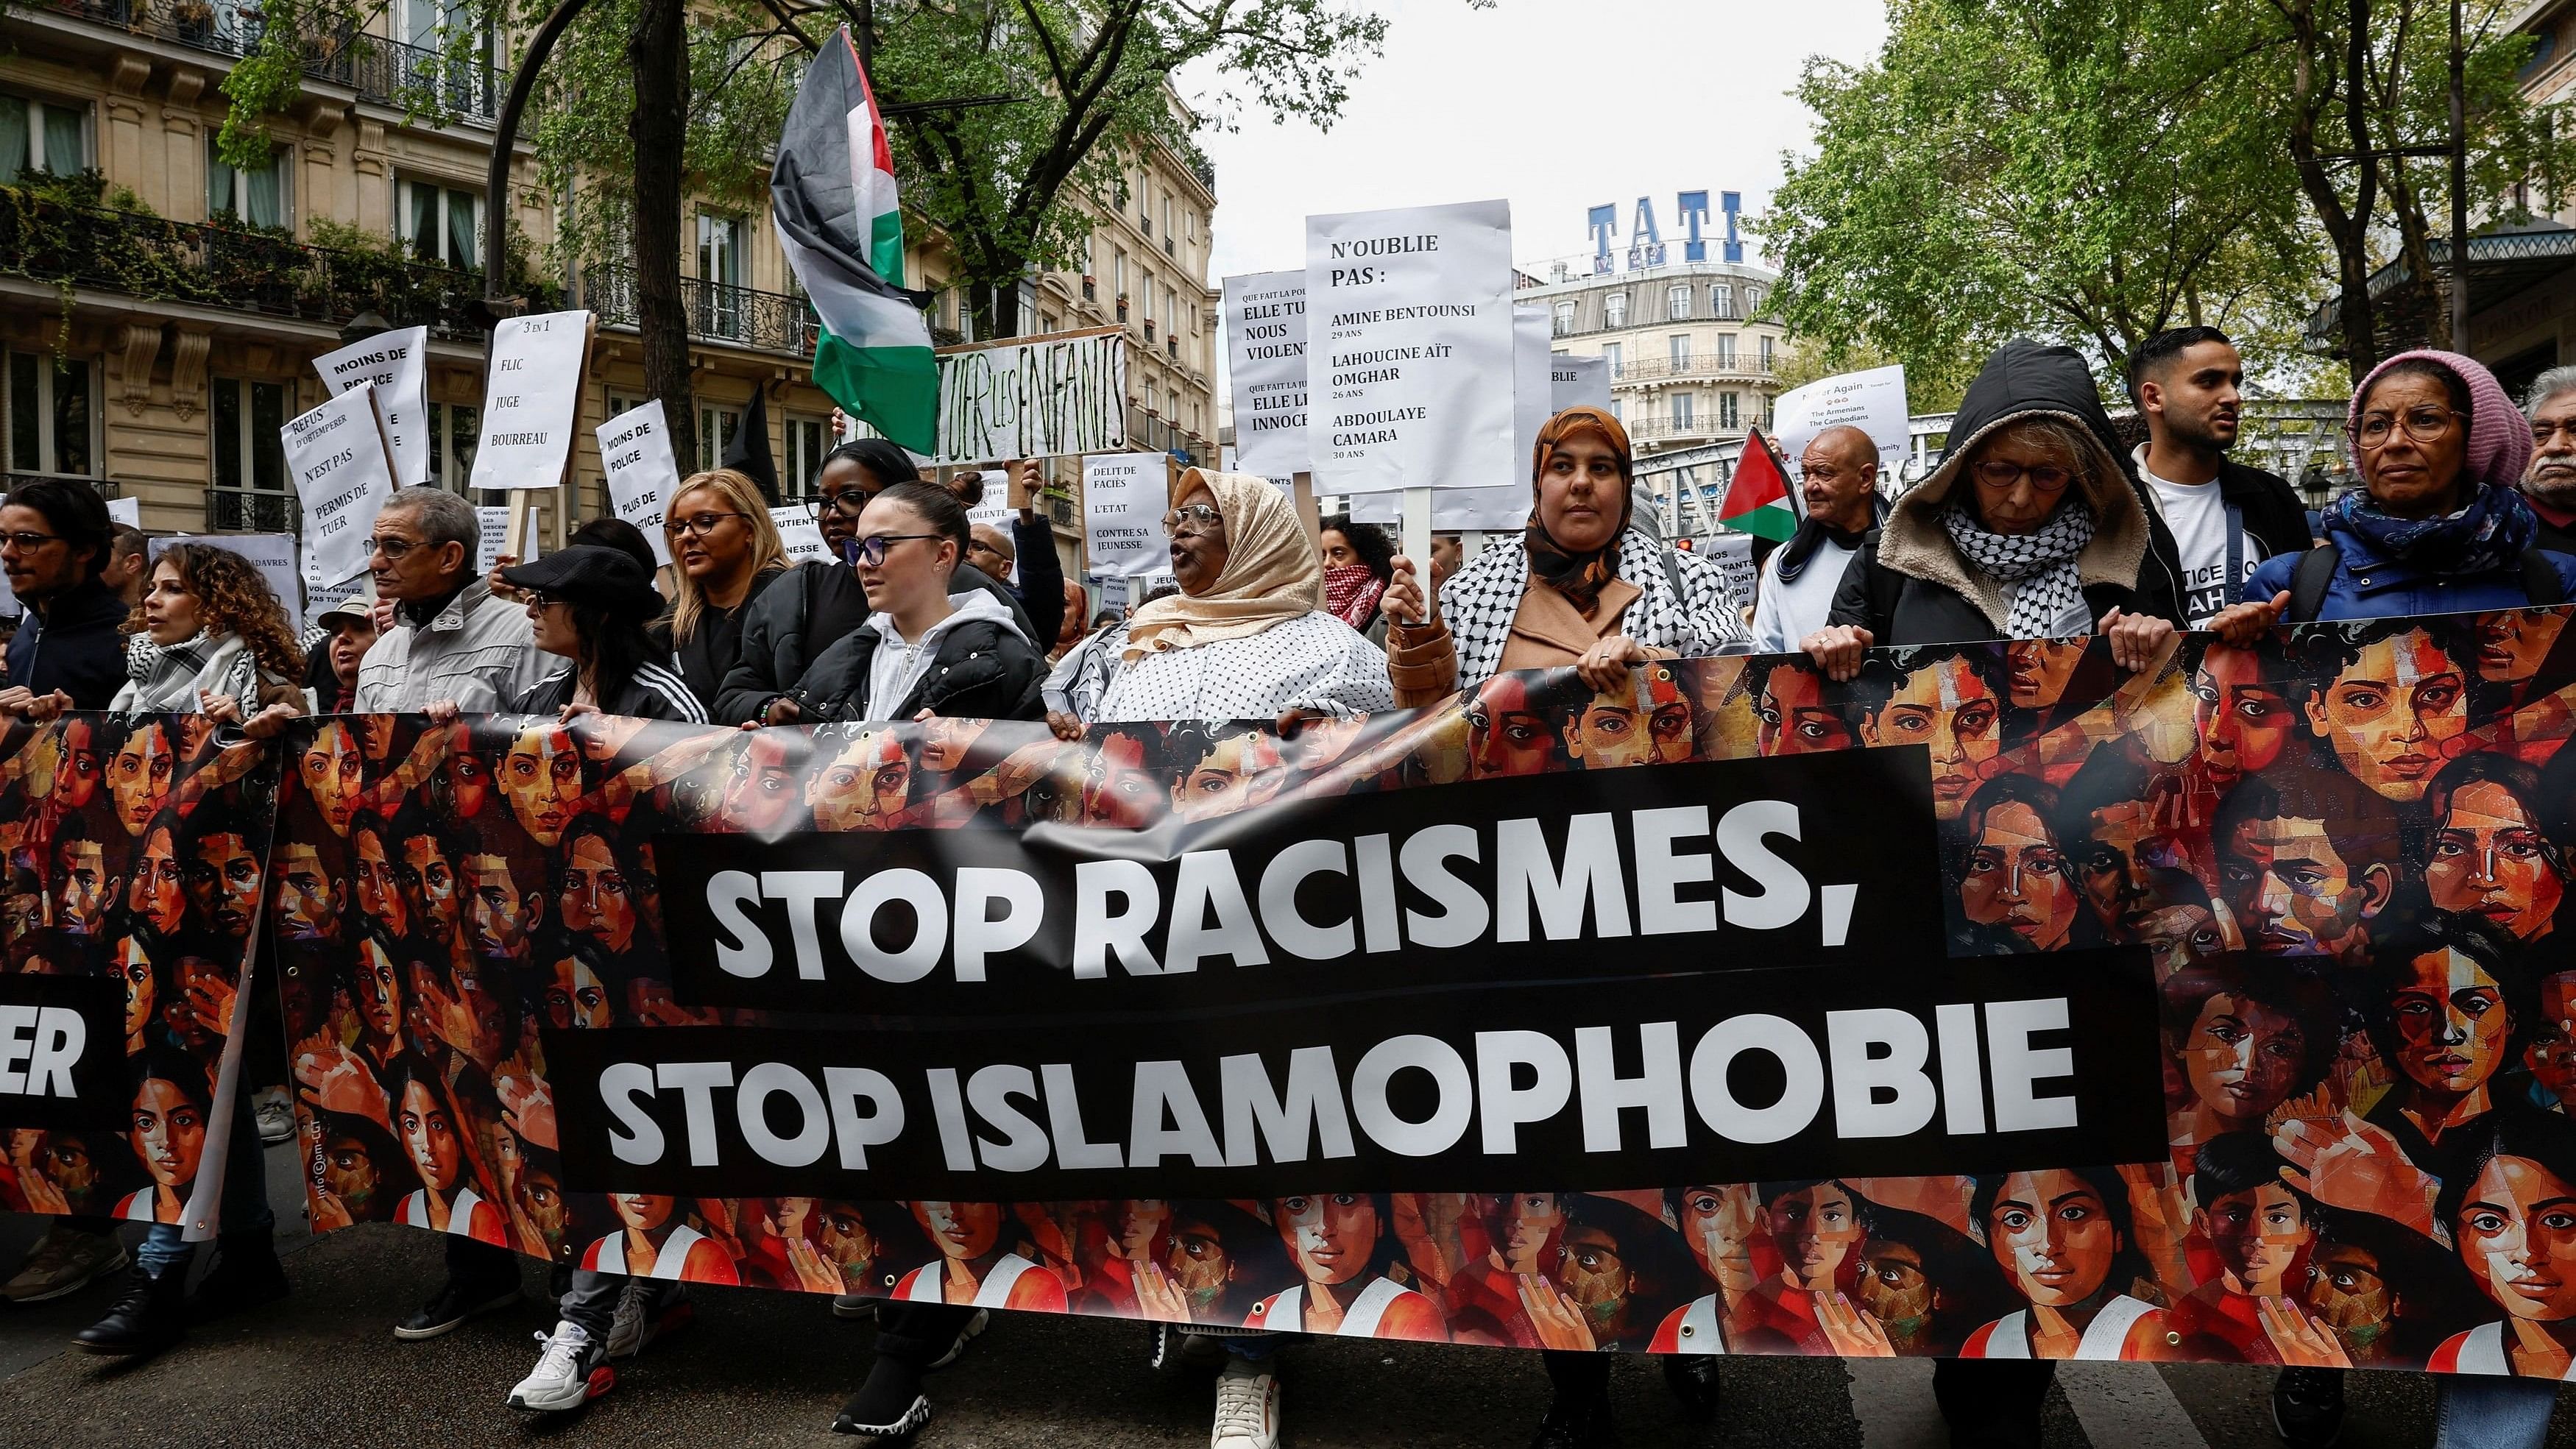 <div class="paragraphs"><p>People attend a demonstration called by various organisations against racism, Islamophobia and the protection of children in Paris, France.</p></div>